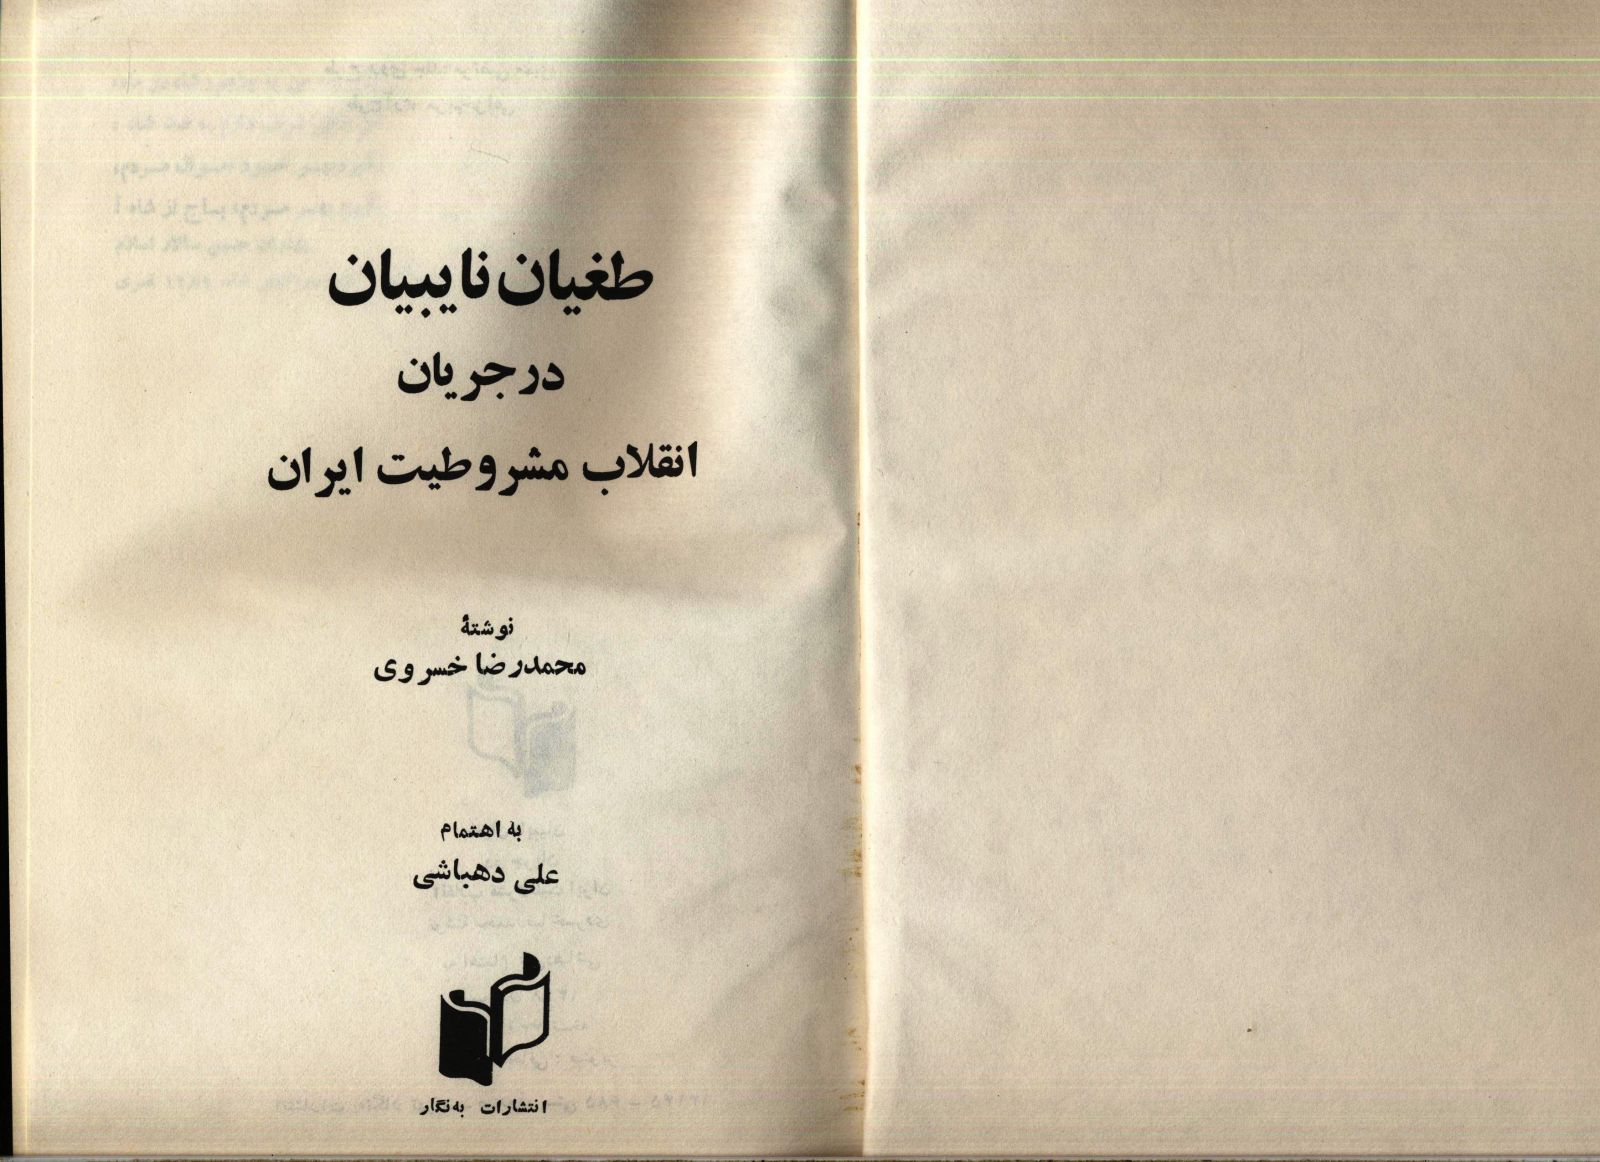 The Nayebis during the constitutional Revolution of Iran